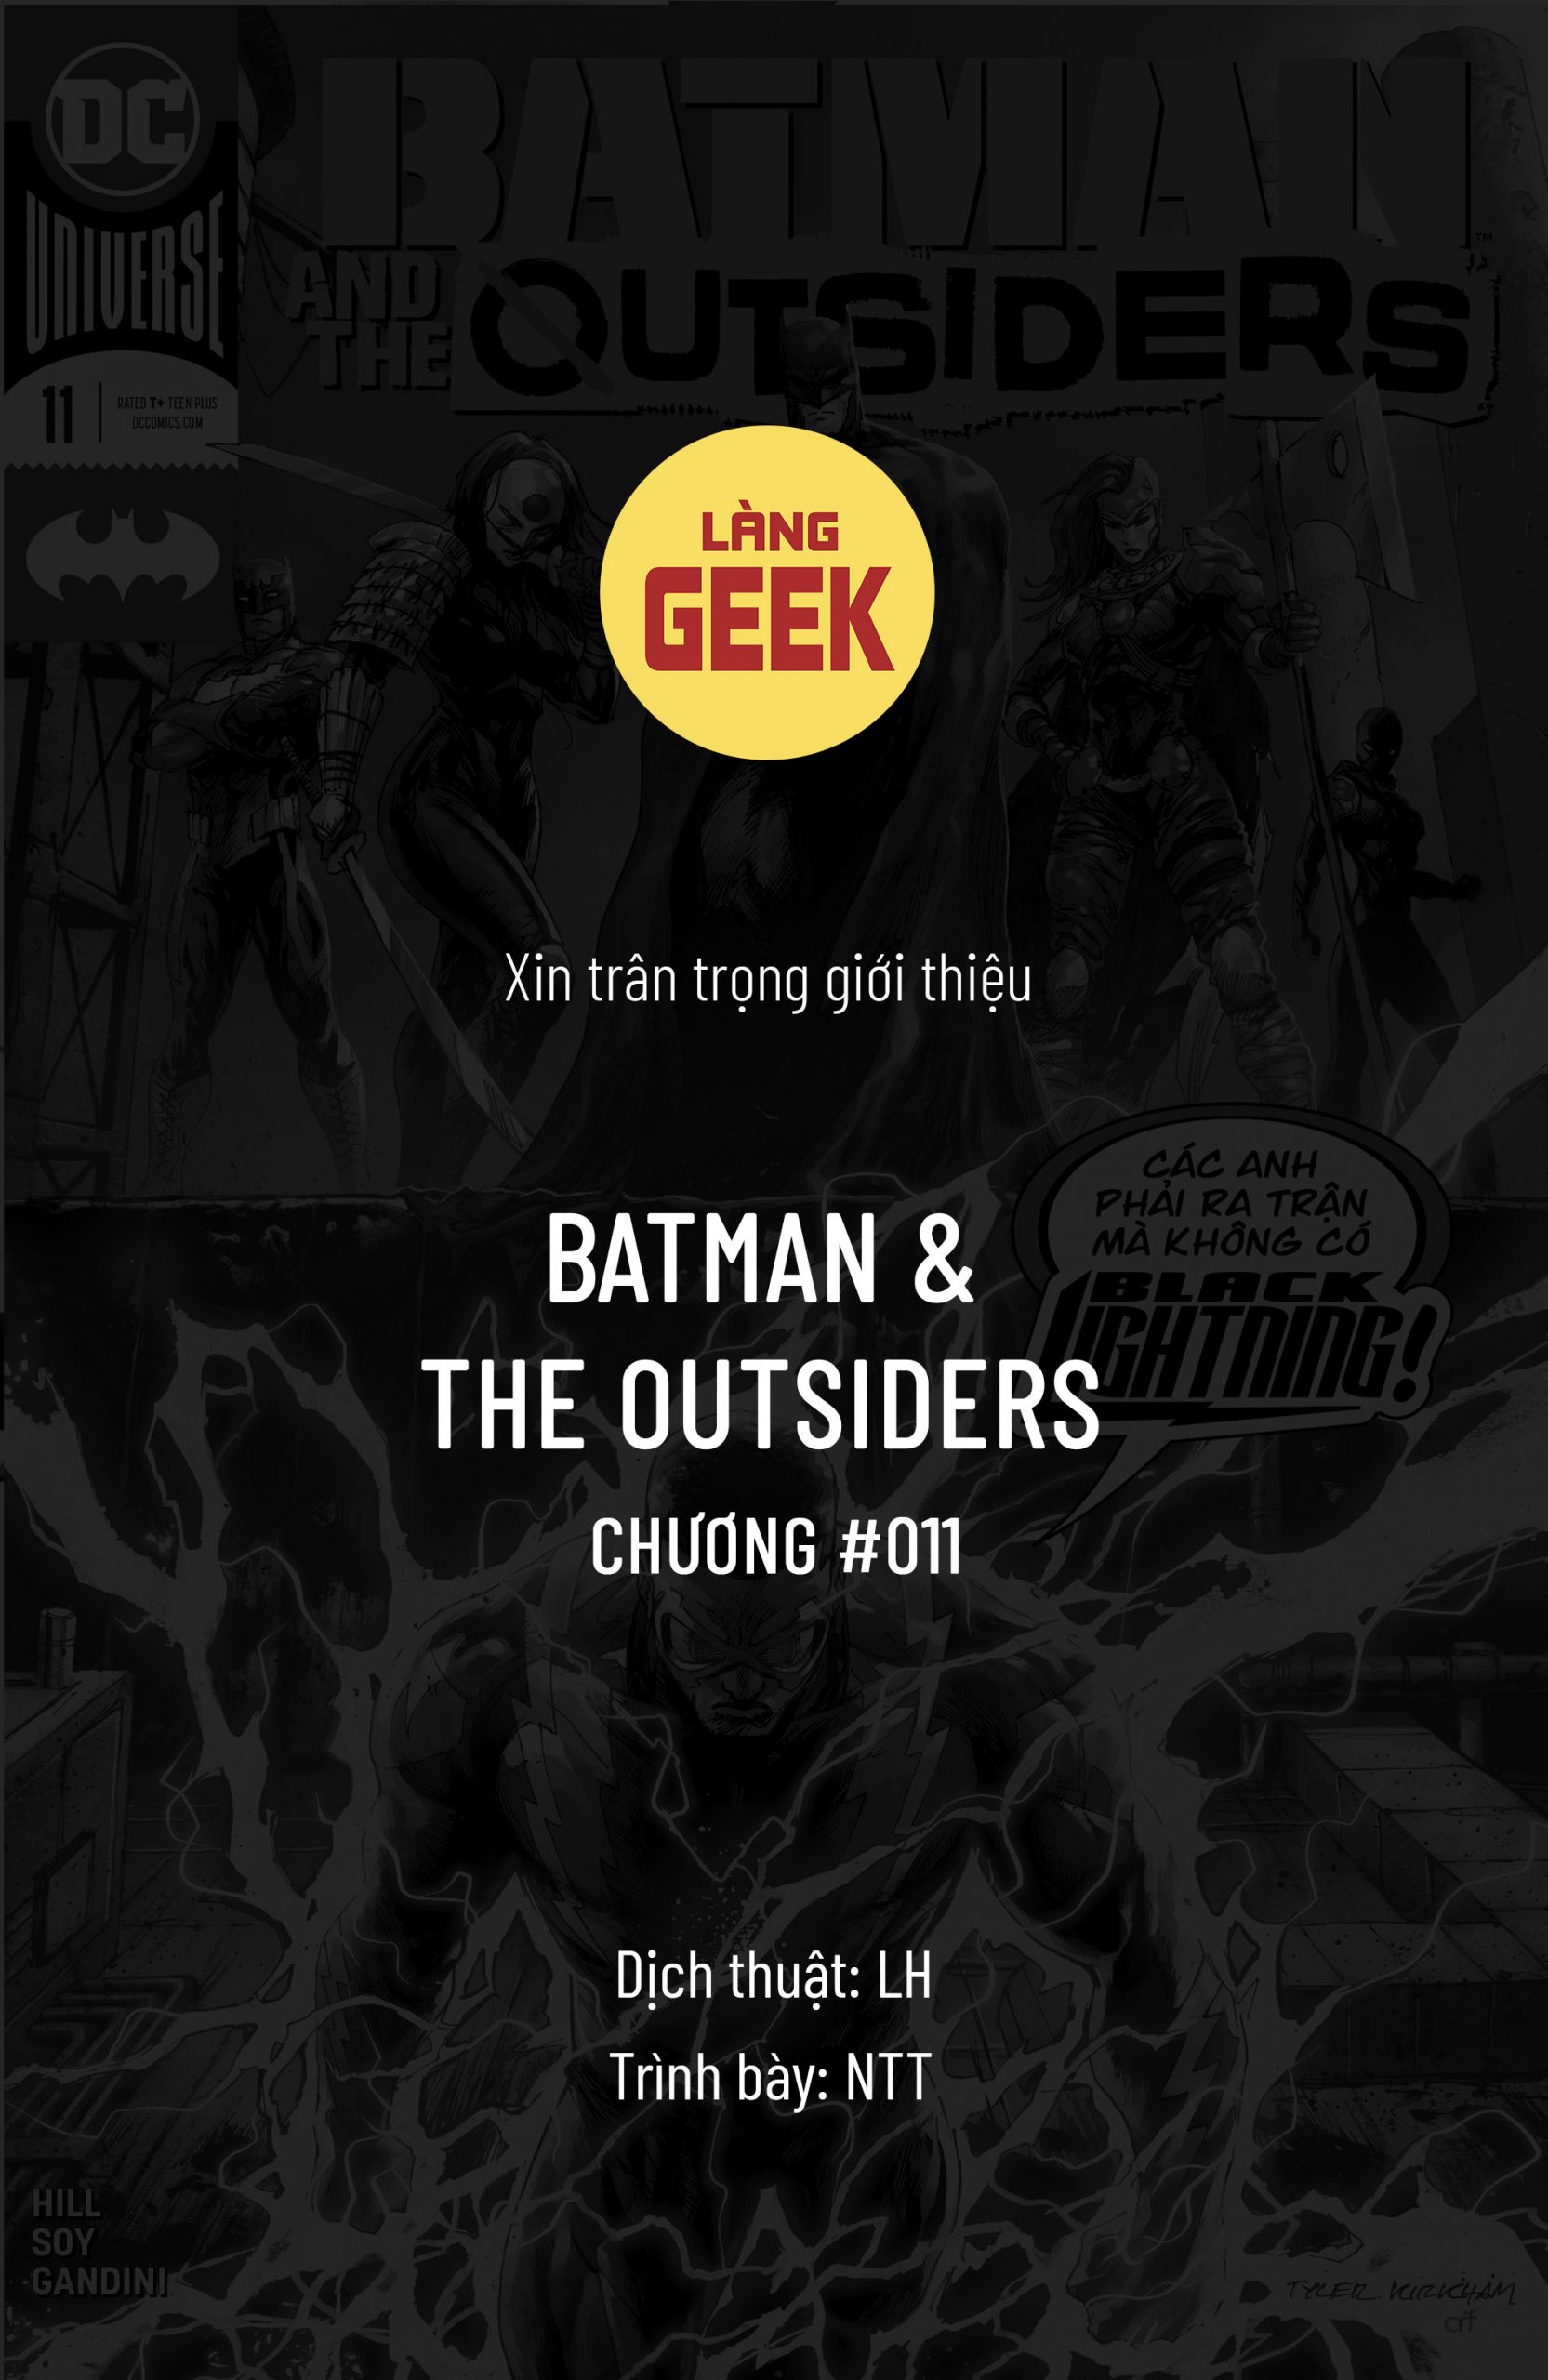 https://langgeek.net/wp-content/uploads/2021/11/Batman-and-the-Outsiders-011-001-scaled.jpg